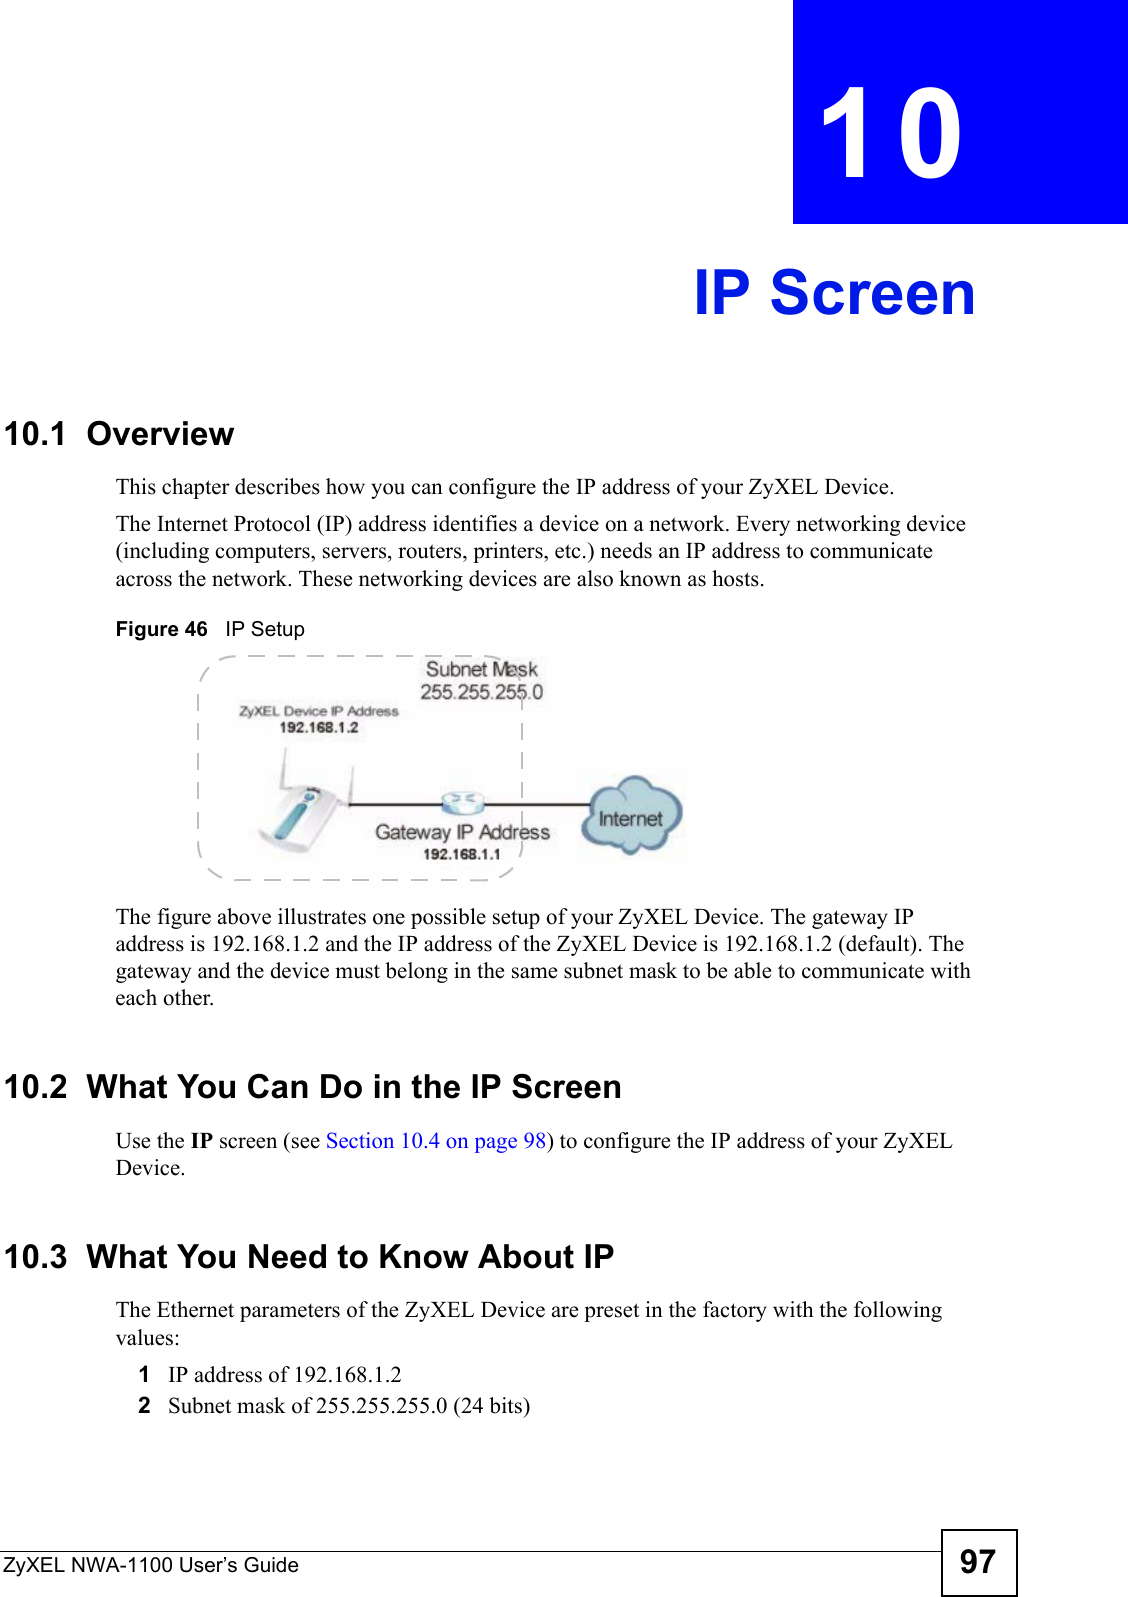 ZyXEL NWA-1100 User’s Guide 97CHAPTER  10 IP Screen10.1  OverviewThis chapter describes how you can configure the IP address of your ZyXEL Device.The Internet Protocol (IP) address identifies a device on a network. Every networking device (including computers, servers, routers, printers, etc.) needs an IP address to communicate across the network. These networking devices are also known as hosts.Figure 46   IP SetupThe figure above illustrates one possible setup of your ZyXEL Device. The gateway IP address is 192.168.1.2 and the IP address of the ZyXEL Device is 192.168.1.2 (default). The gateway and the device must belong in the same subnet mask to be able to communicate with each other.10.2  What You Can Do in the IP ScreenUse the IP screen (see Section 10.4 on page 98) to configure the IP address of your ZyXEL Device.10.3  What You Need to Know About IPThe Ethernet parameters of the ZyXEL Device are preset in the factory with the following values:1IP address of 192.168.1.22Subnet mask of 255.255.255.0 (24 bits)